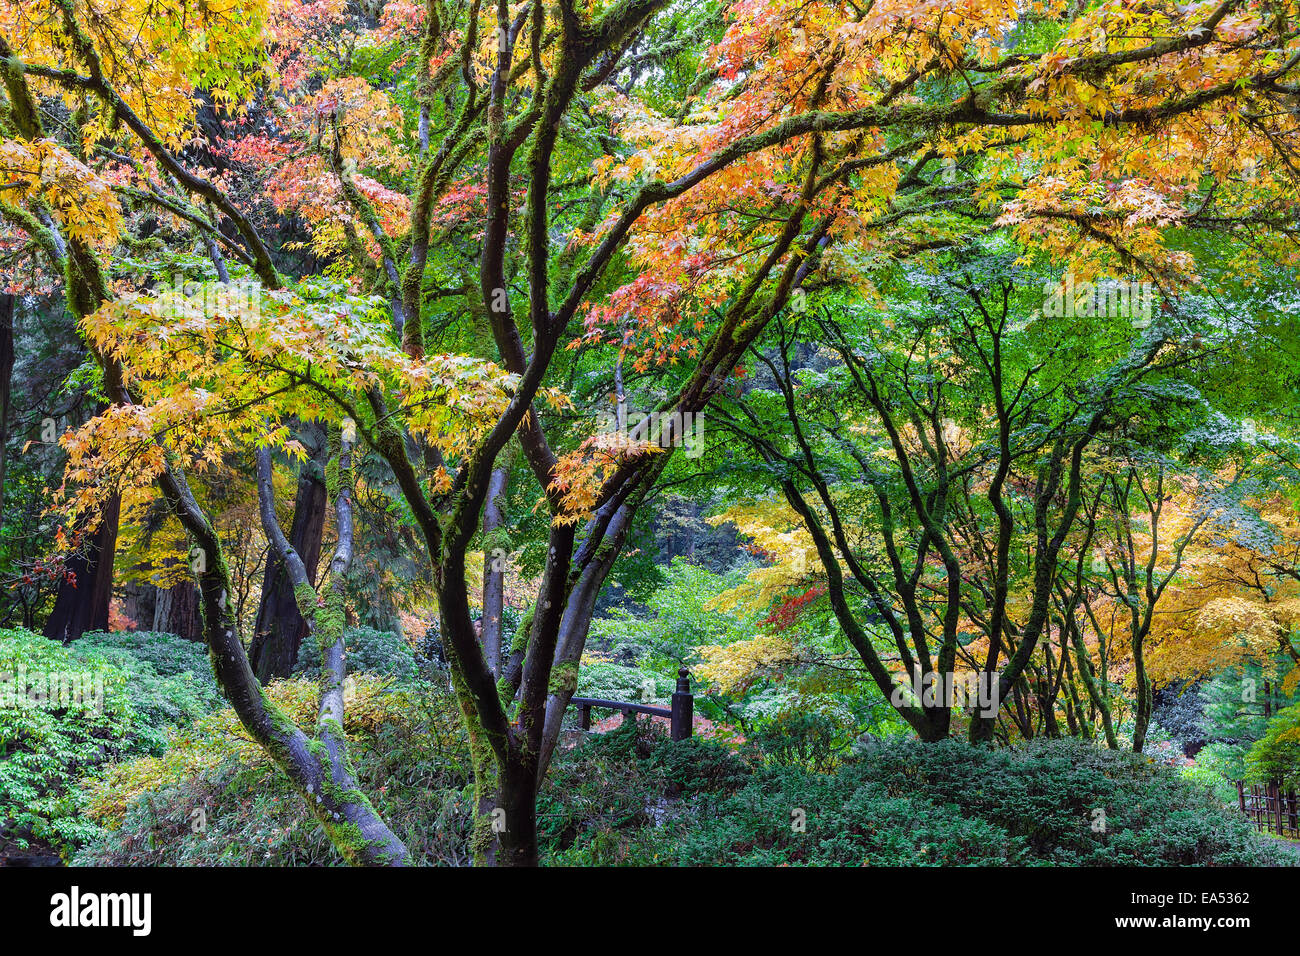 Japanese Maple Trees Fall Color Foliage by the Moon Bridge at Portland Japanese Garden in Autumn Stock Photo